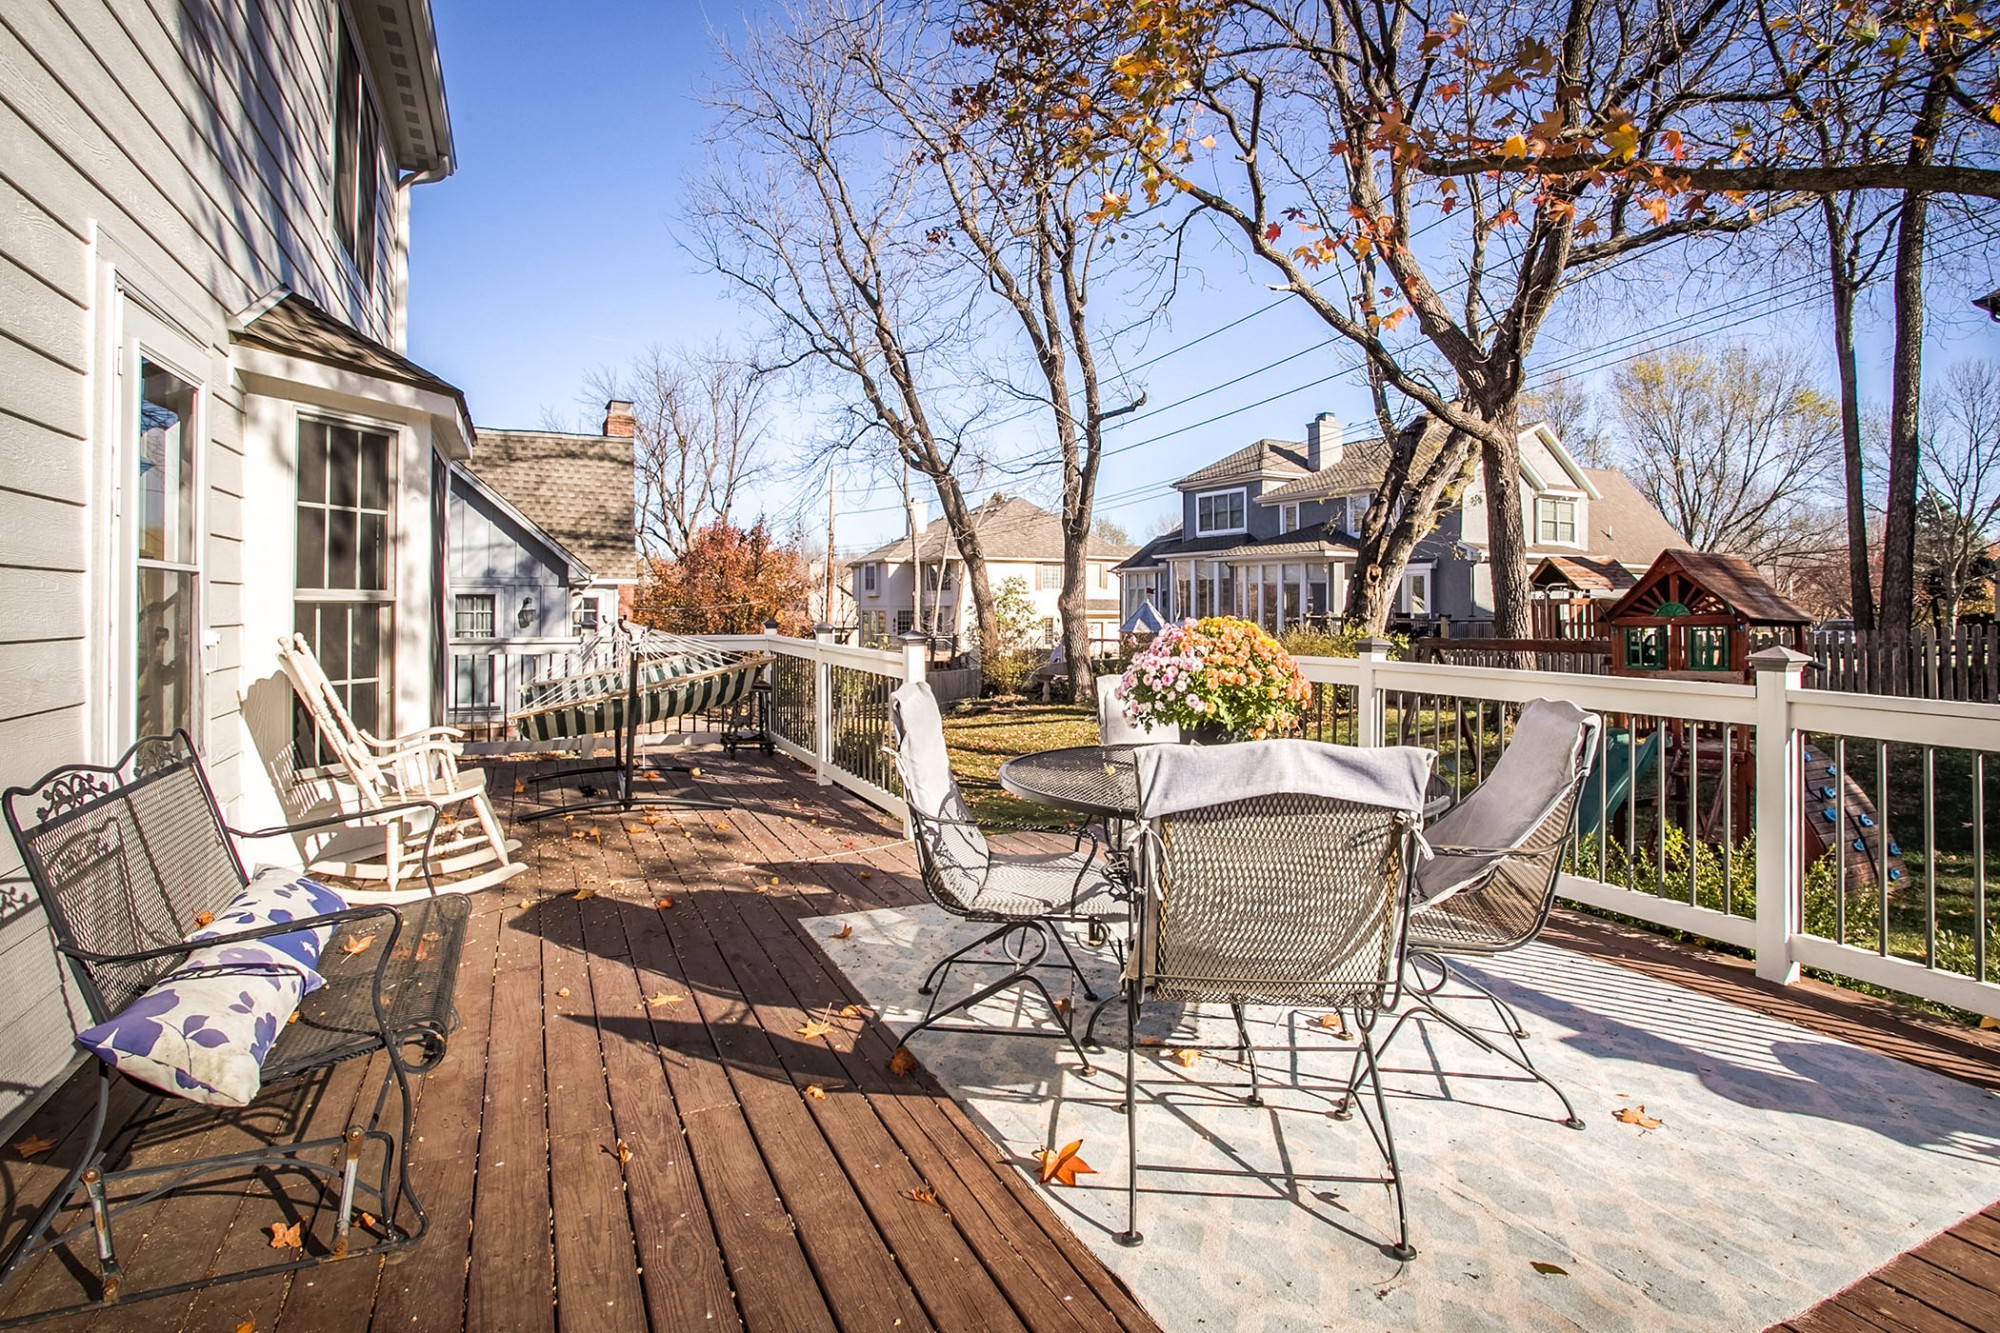 Relax on the huge 15x30 east facing deck, a wonderful spot to enjoy an evening barbecue and the views of the grassy backyard and swing set that stays.